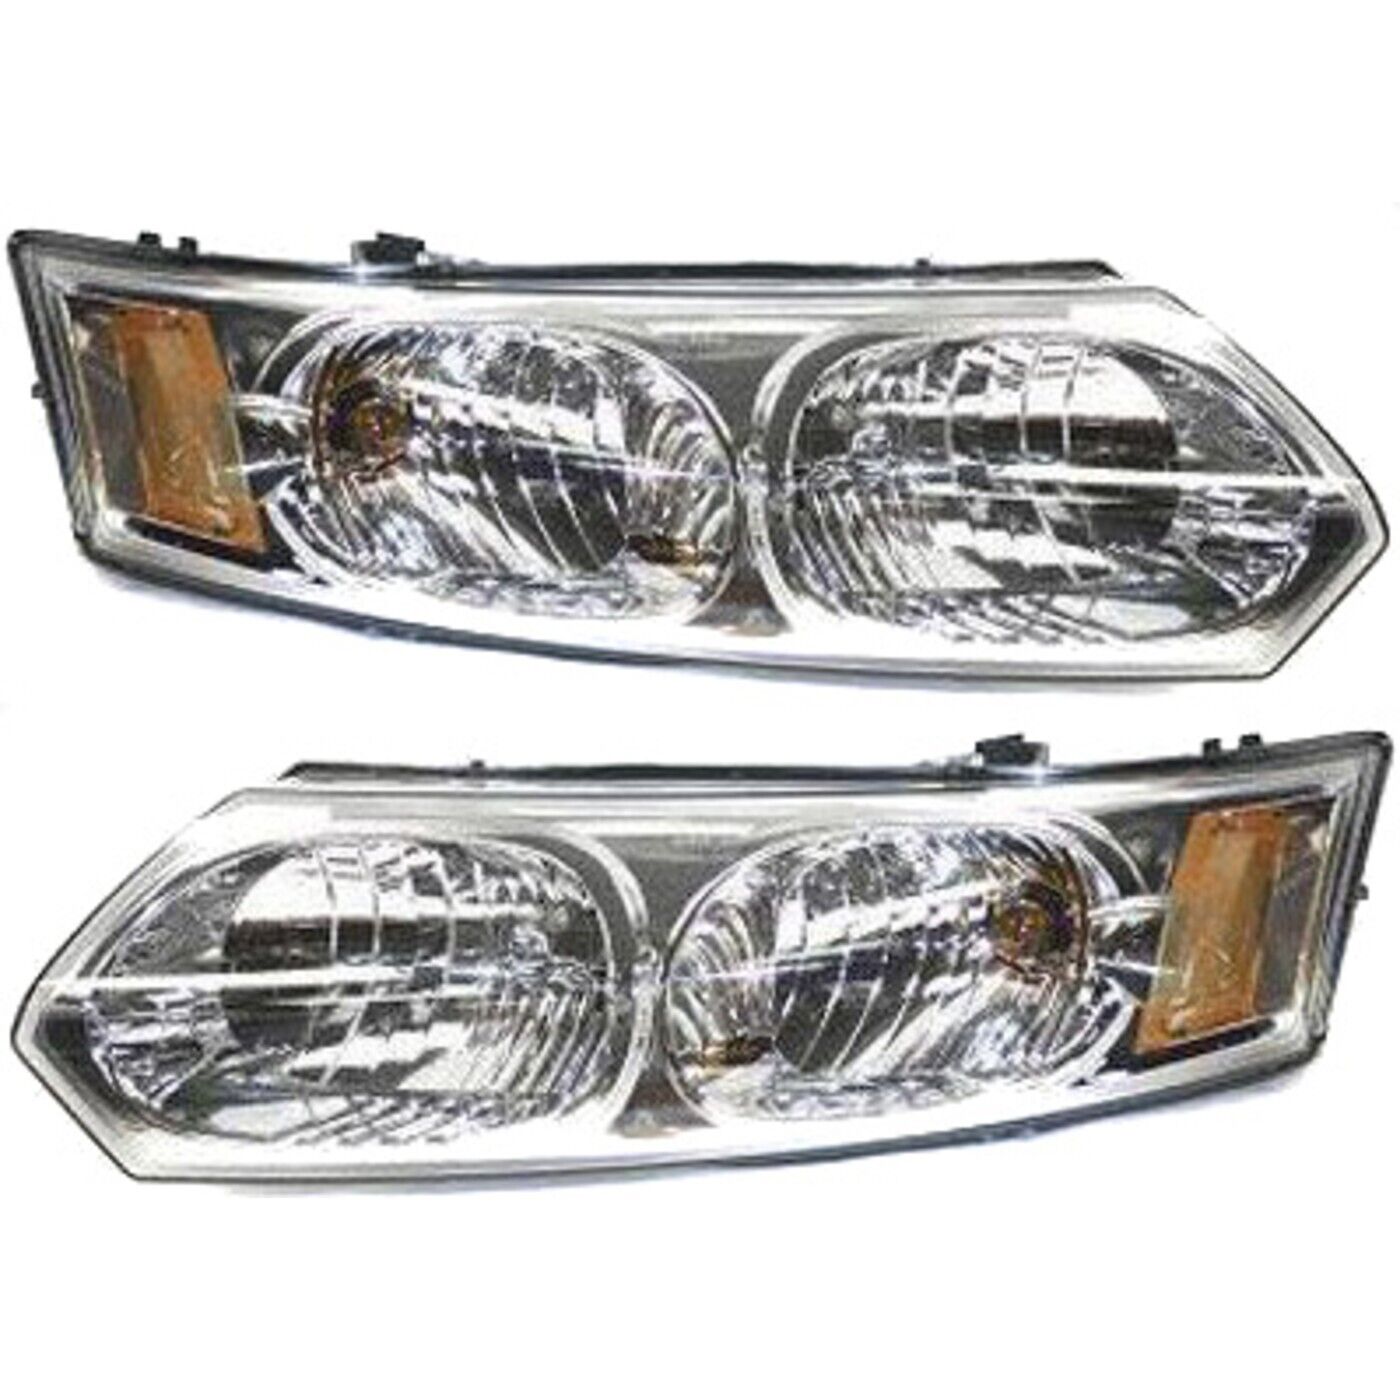 Headlight Set For 2003-2007 Saturn Ion Driver and Passenger Side with Bulb Sedan